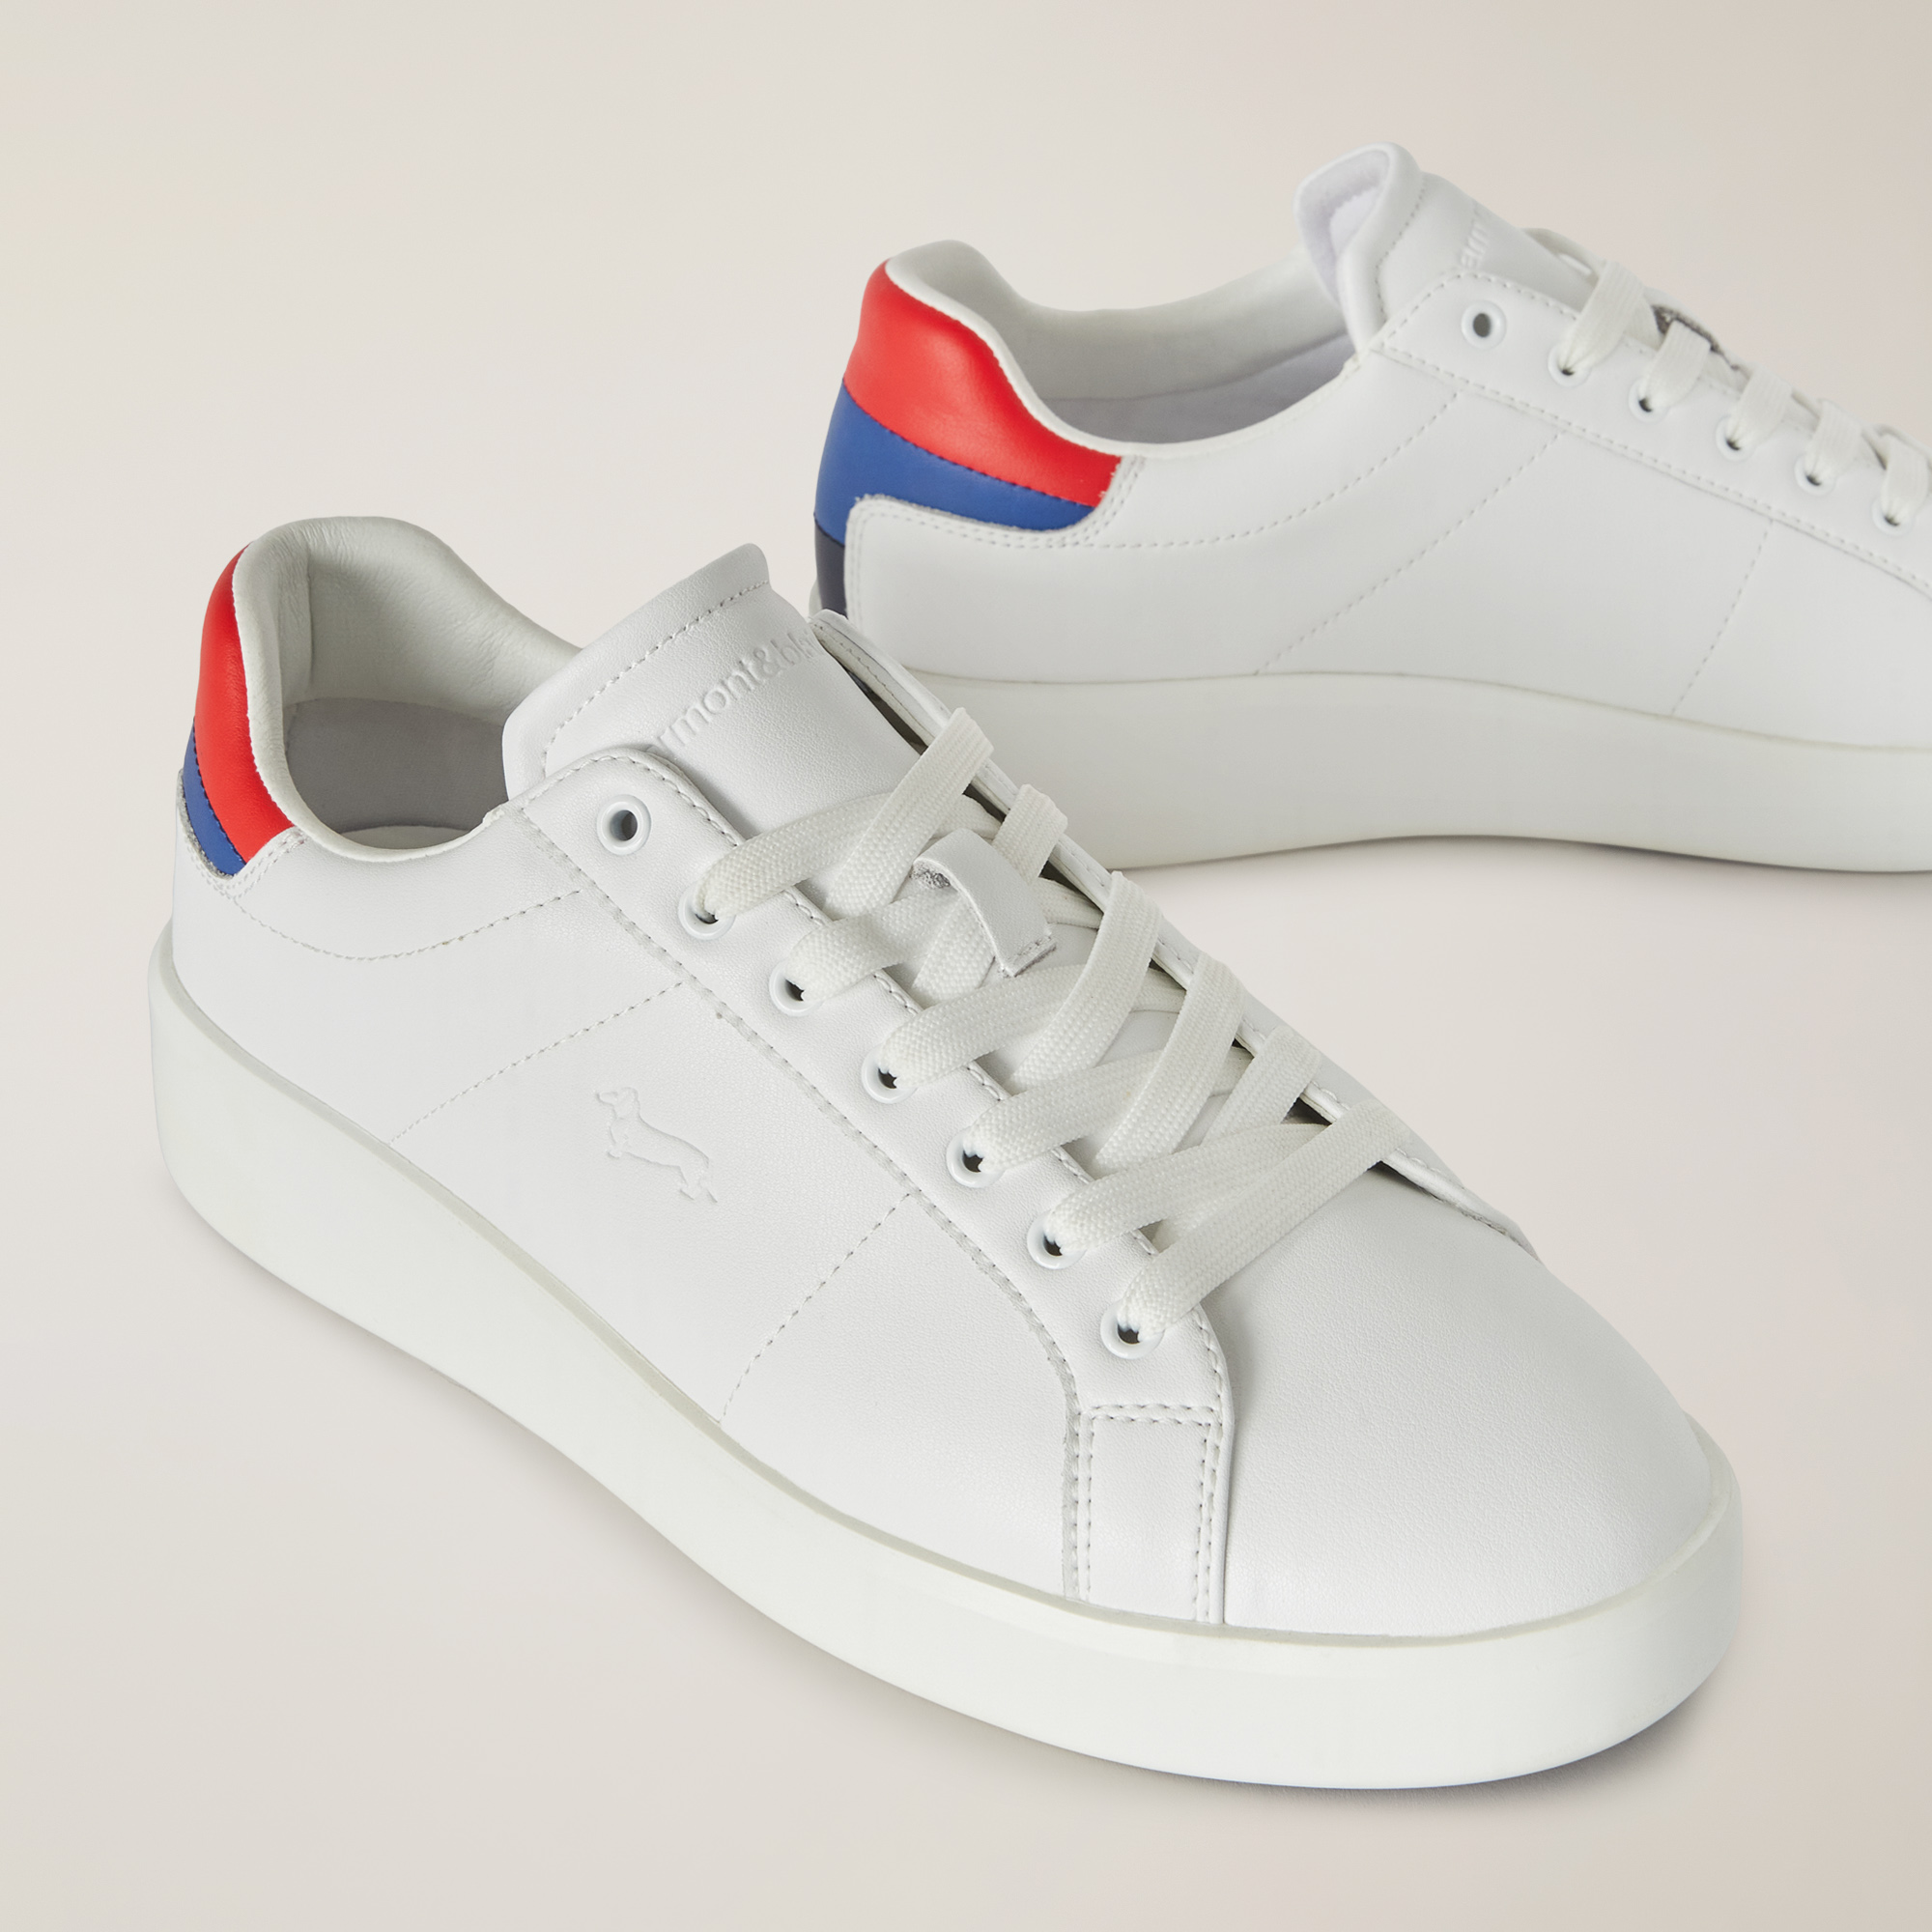 Sneaker with Oversize Sole, White/Red, large image number 3